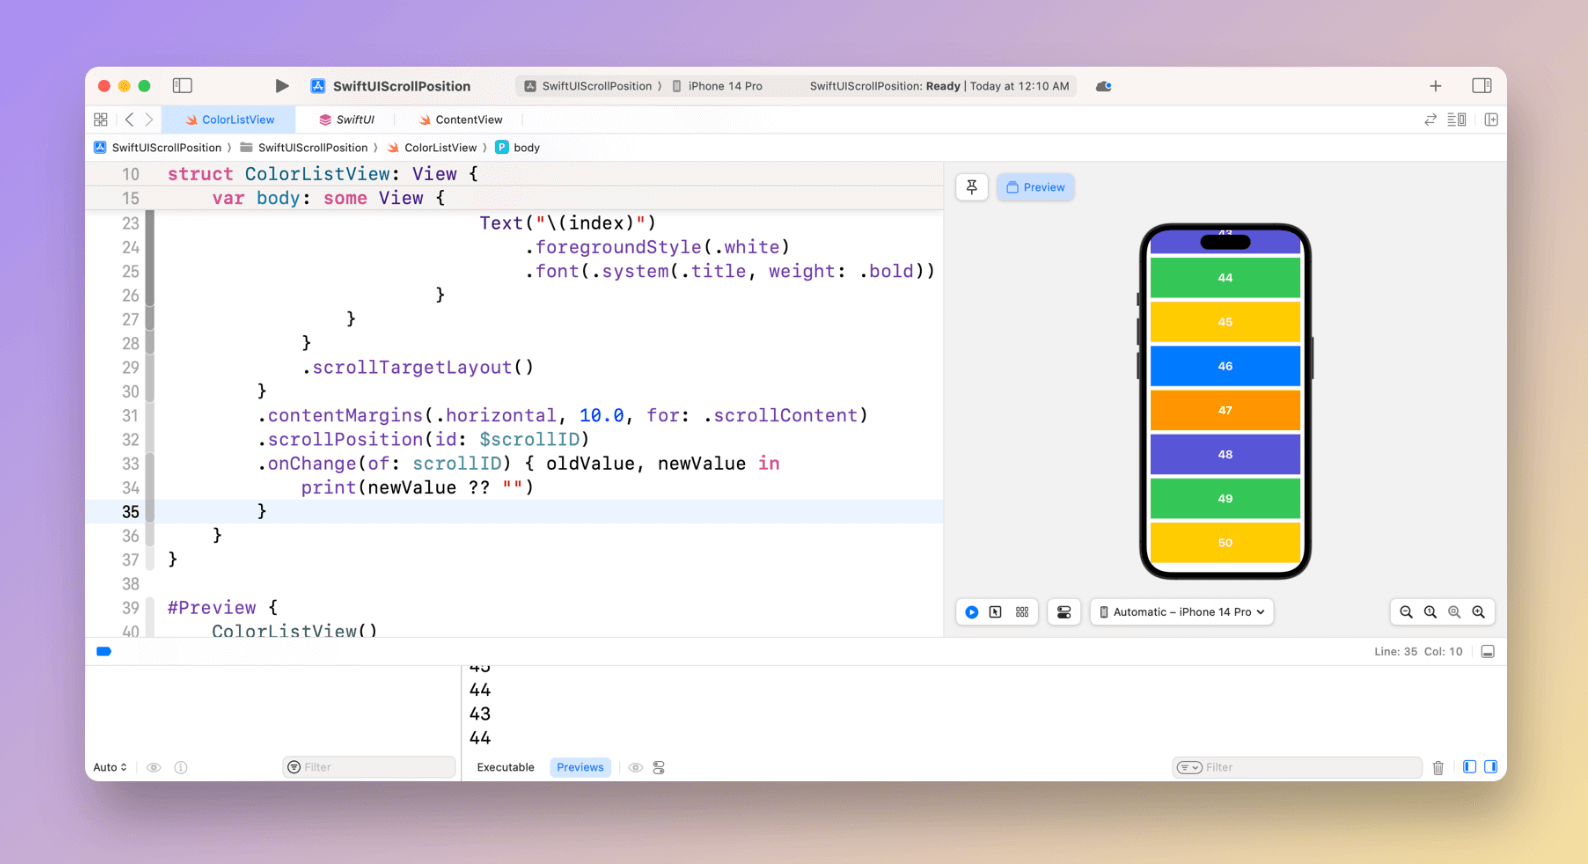 swiftui-scroll-view-scroll-positions